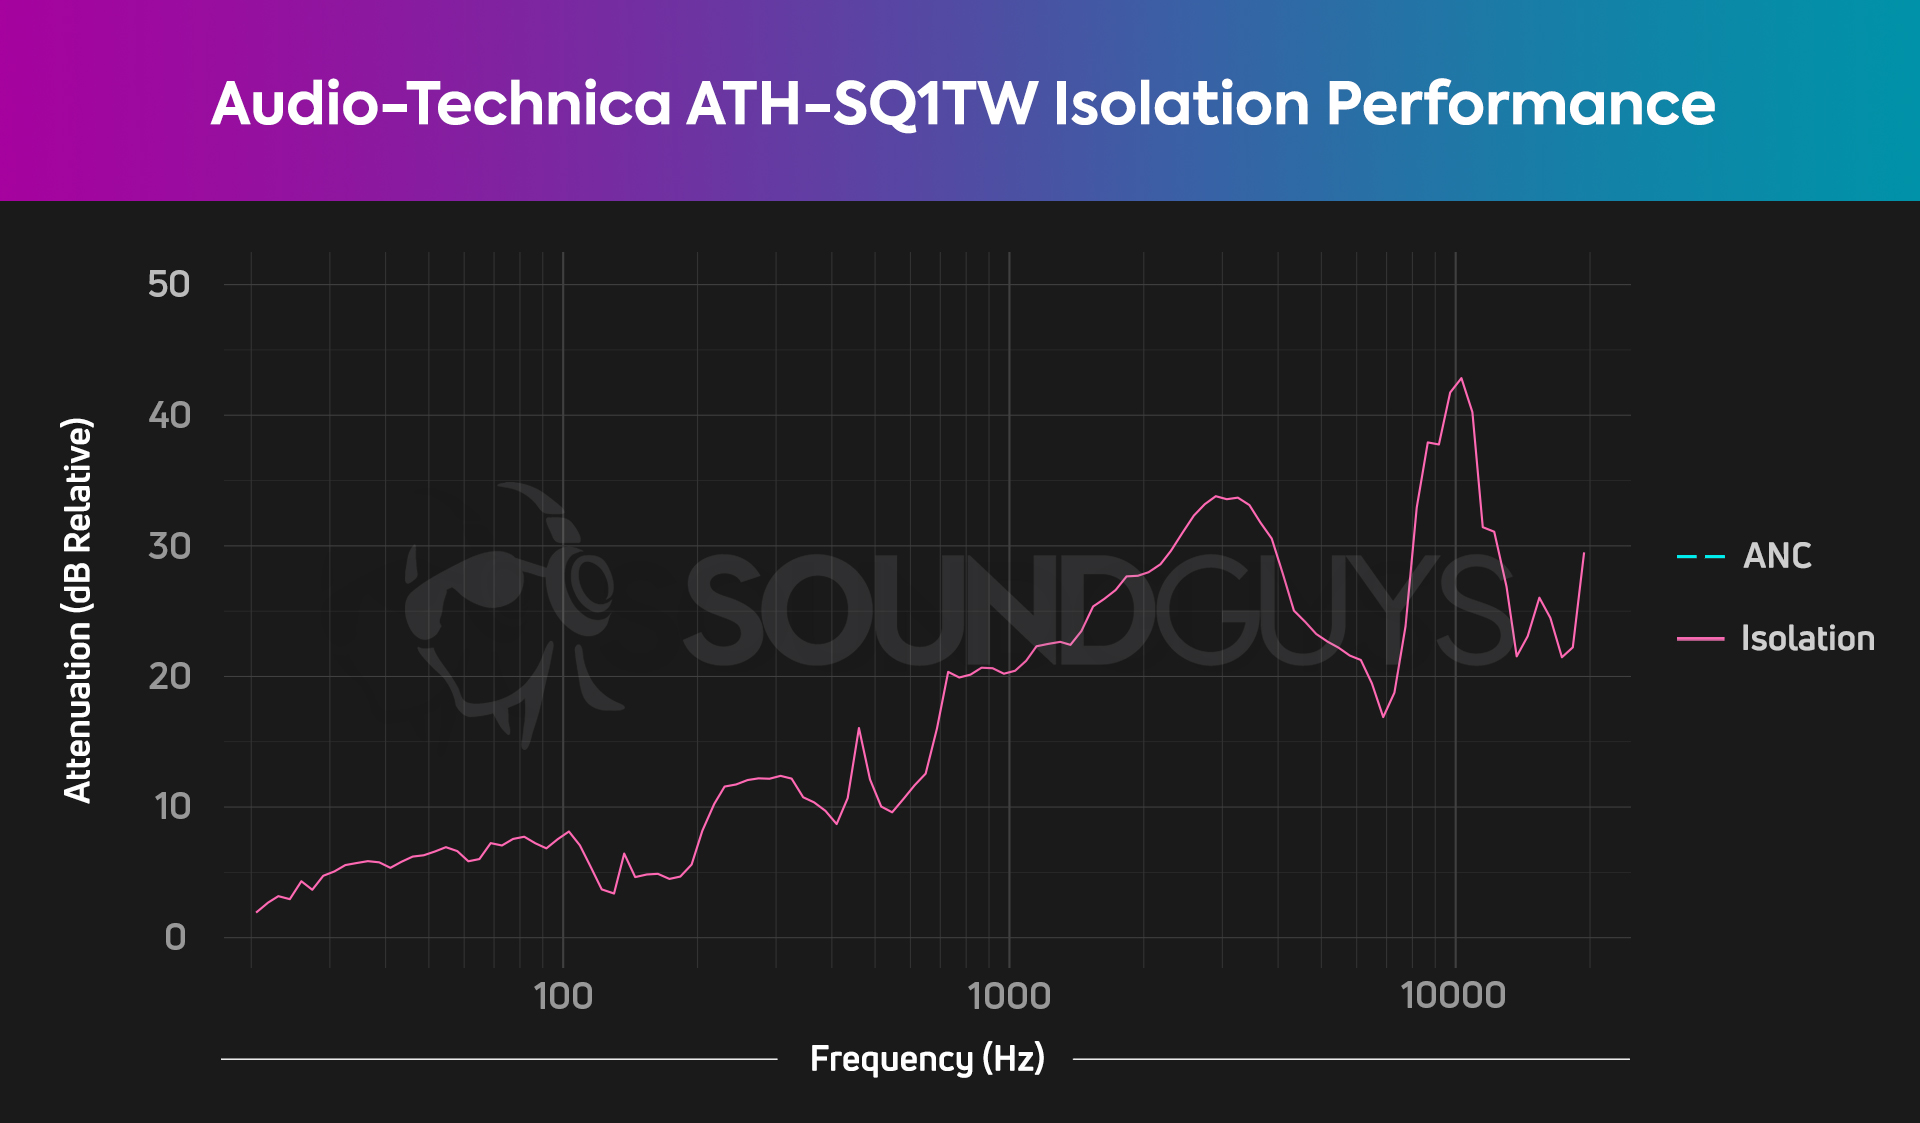 An isolation chart for the Audio-Technica ATH-SQ1TW true wireless earbuds, which shows very good isolation performance for a pair of earbuds